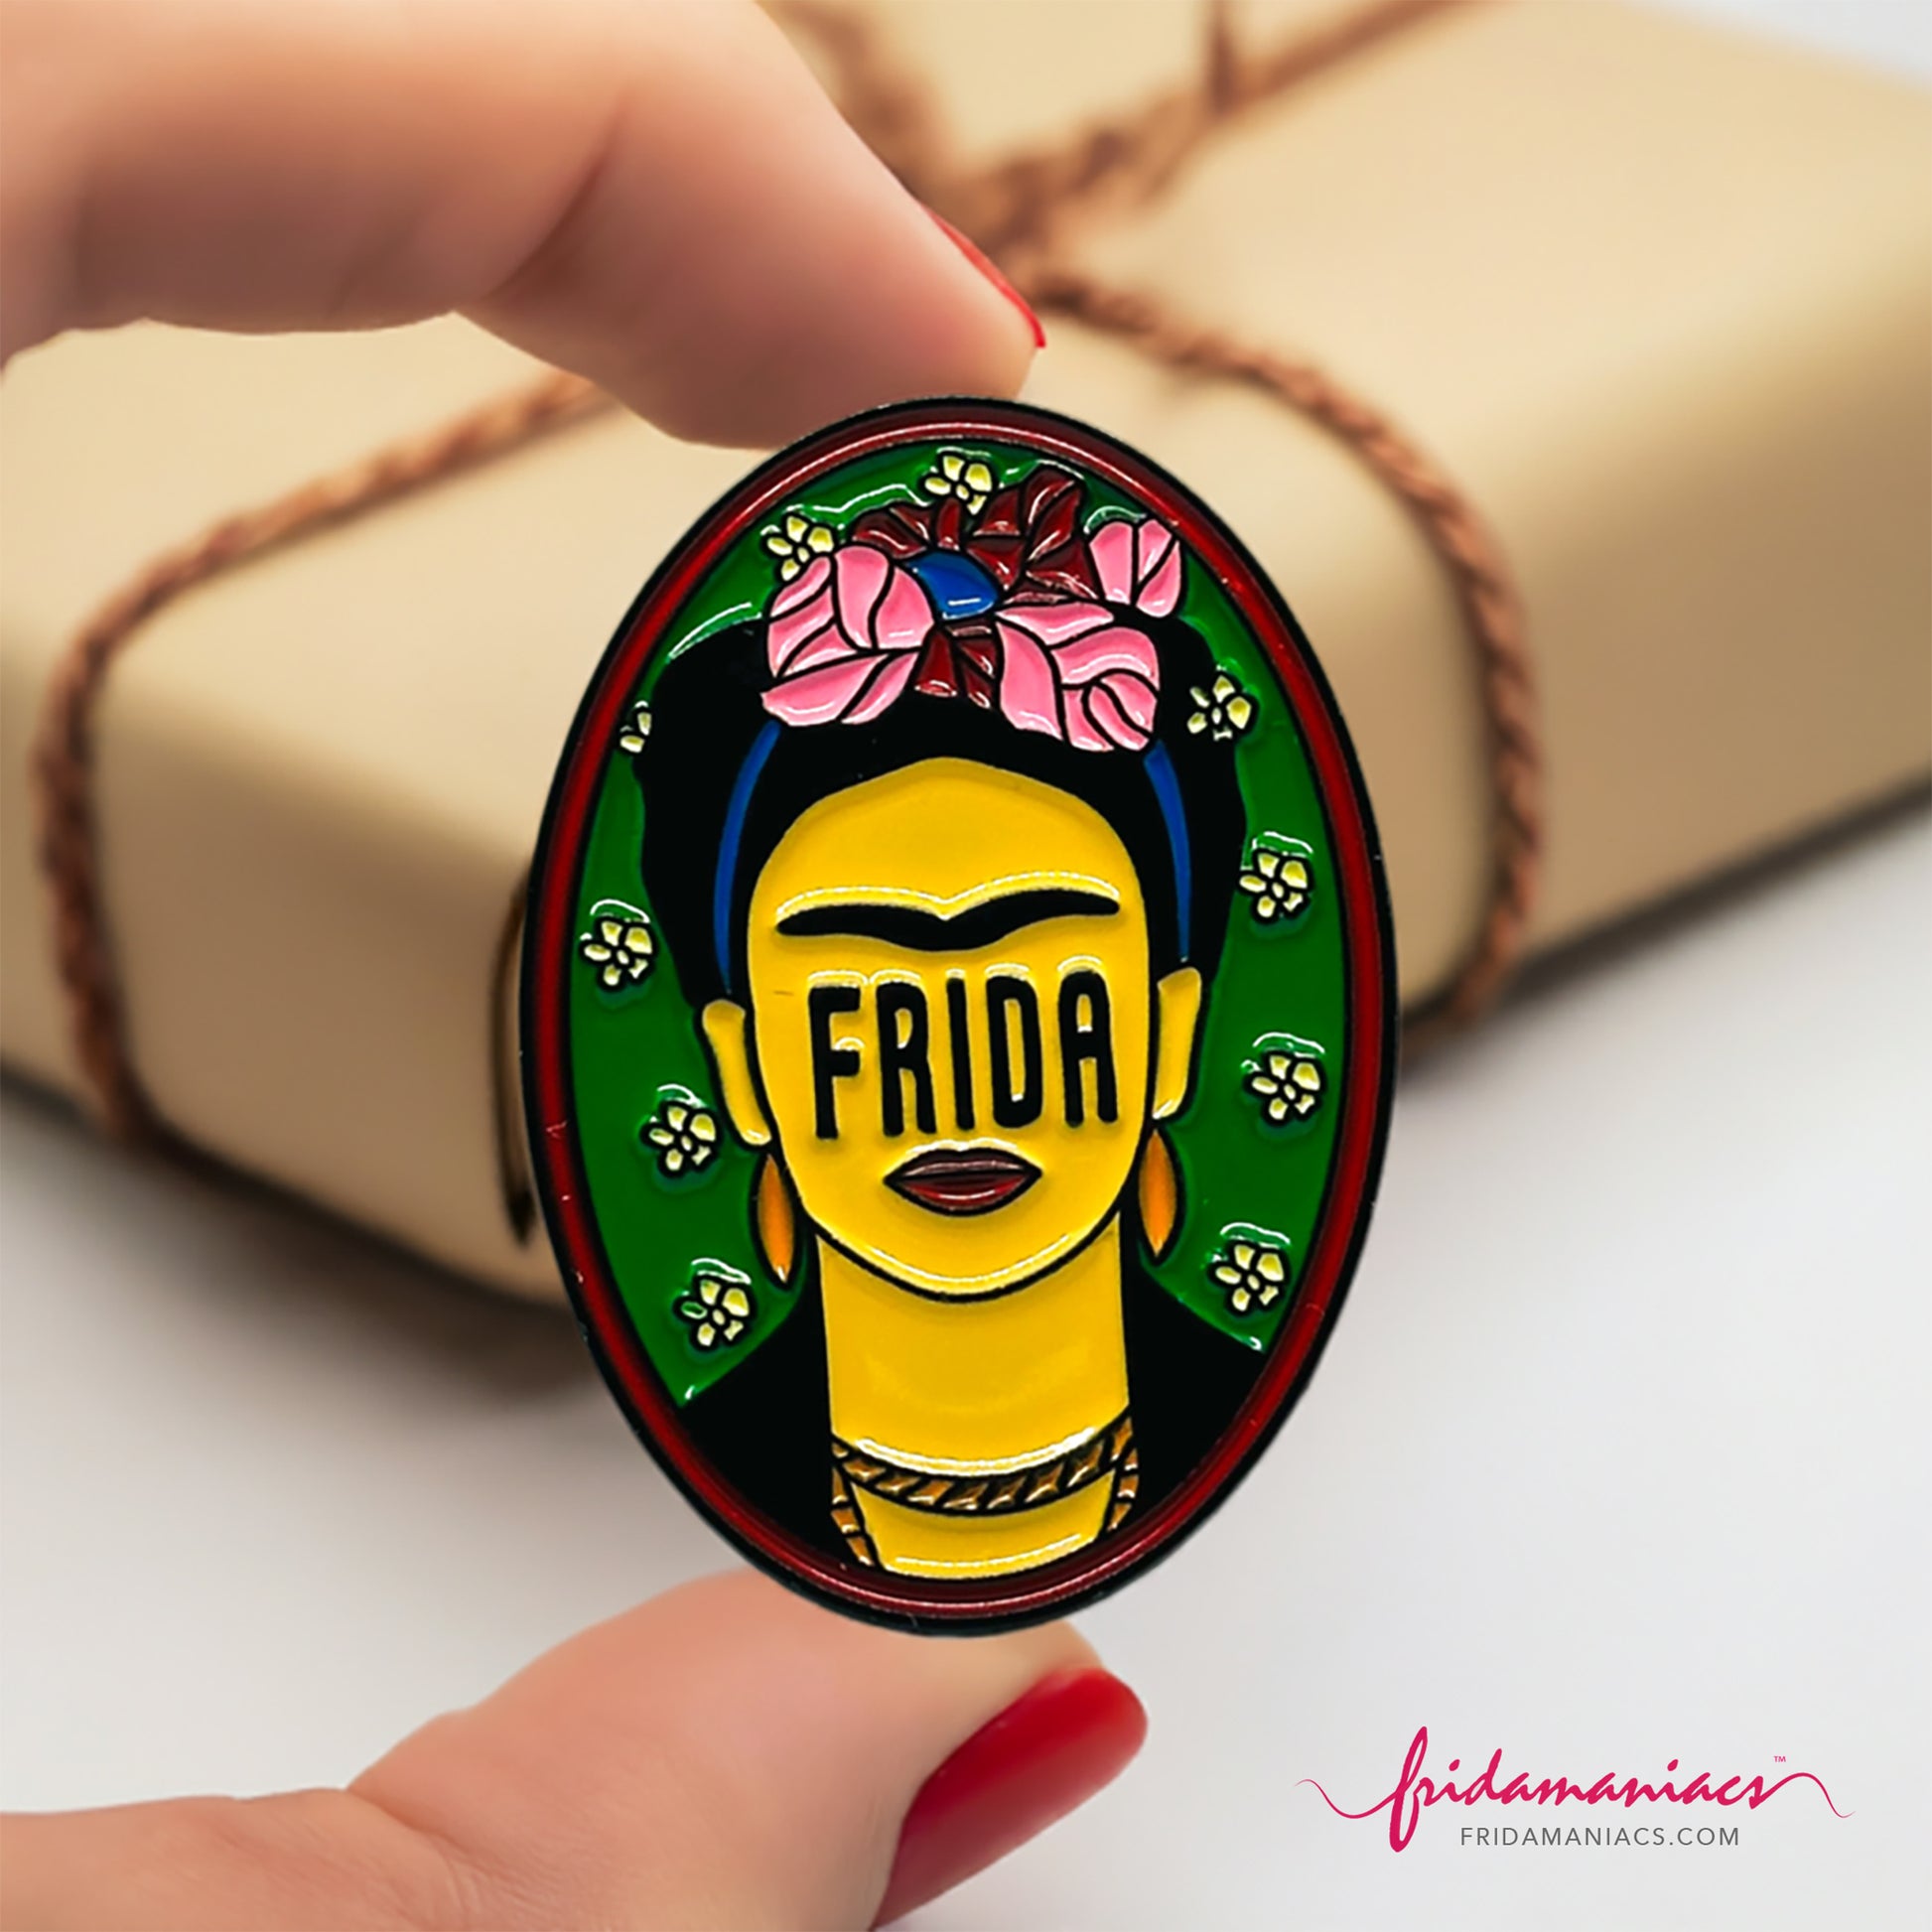  Frida Kahlo oval enamel pin back button with green enamel as background, wine tone frame, and FRIDA spelling instead of eyes below iconic artist eyebrows with pink flowers. Fridamaniacs. Mexican jewelry.